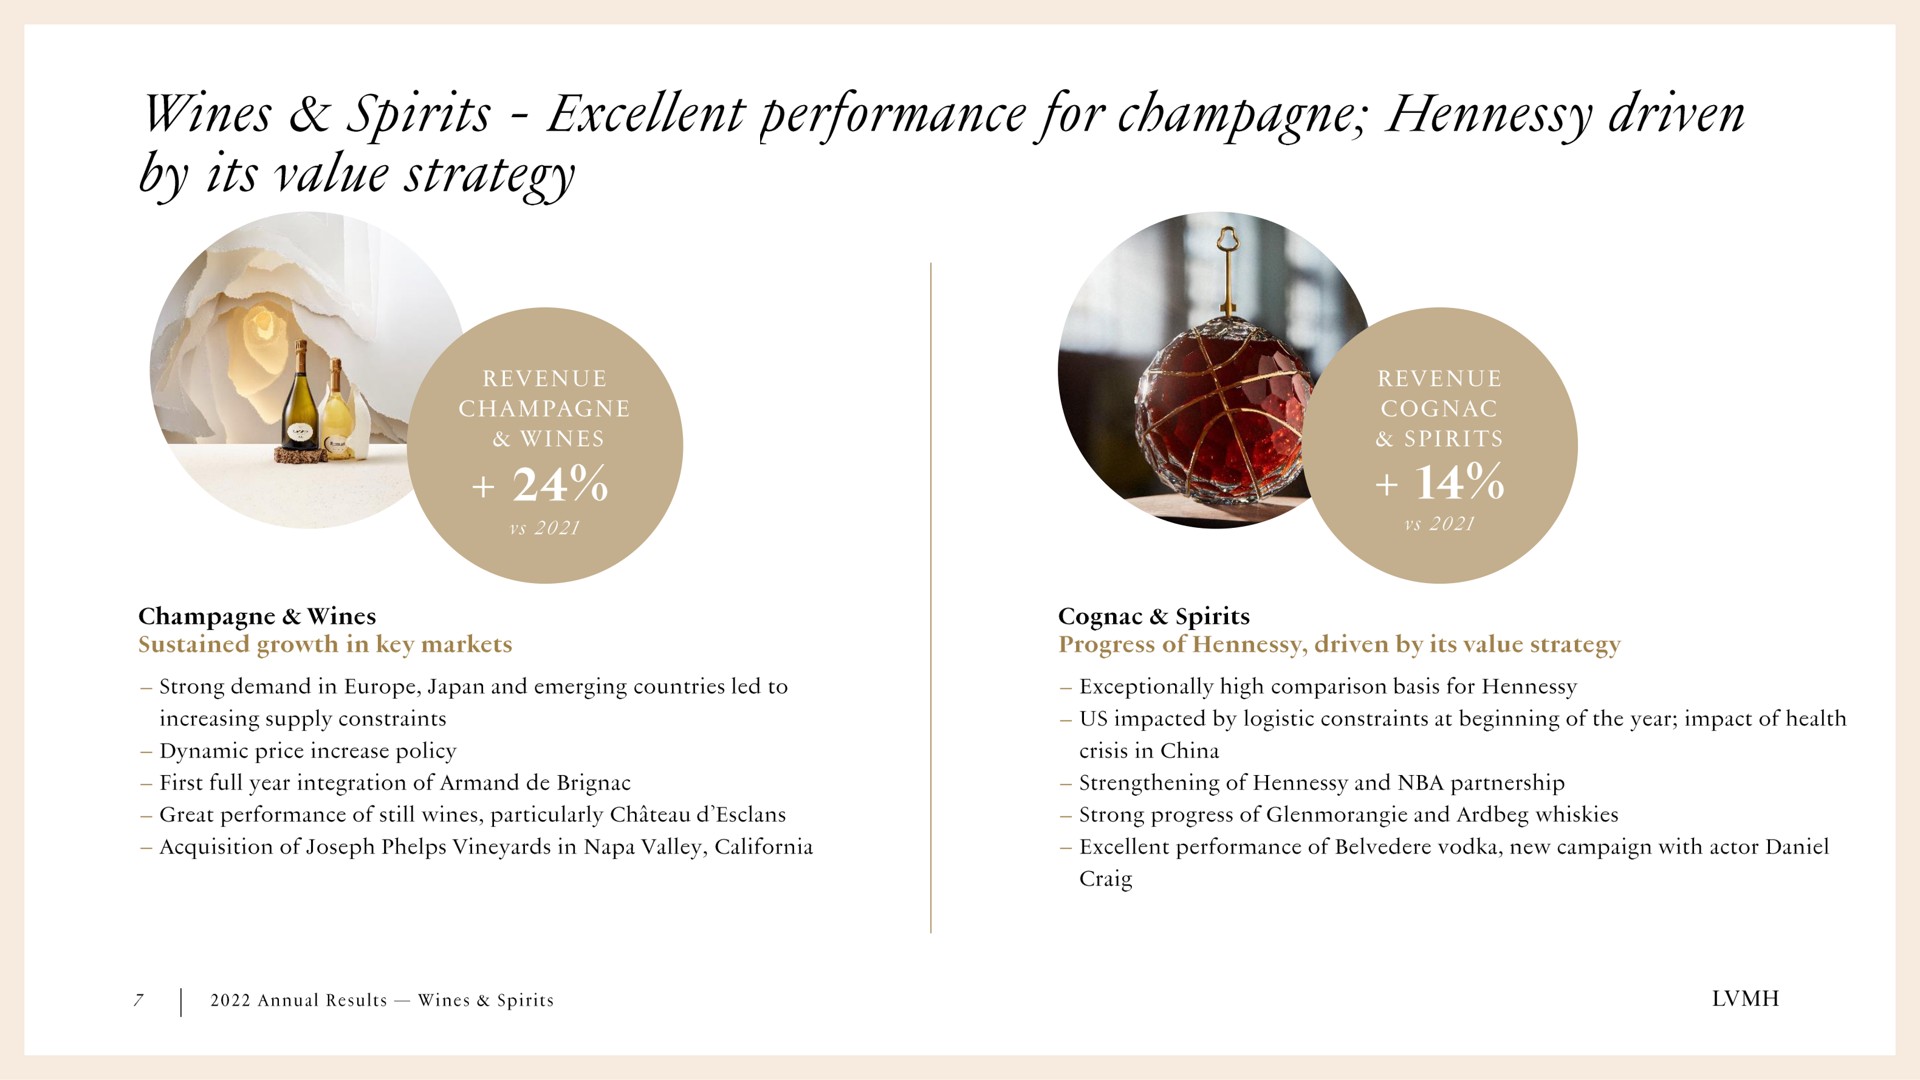 wines spirits excellent performance for champagne driven by its value strategy | LVMH